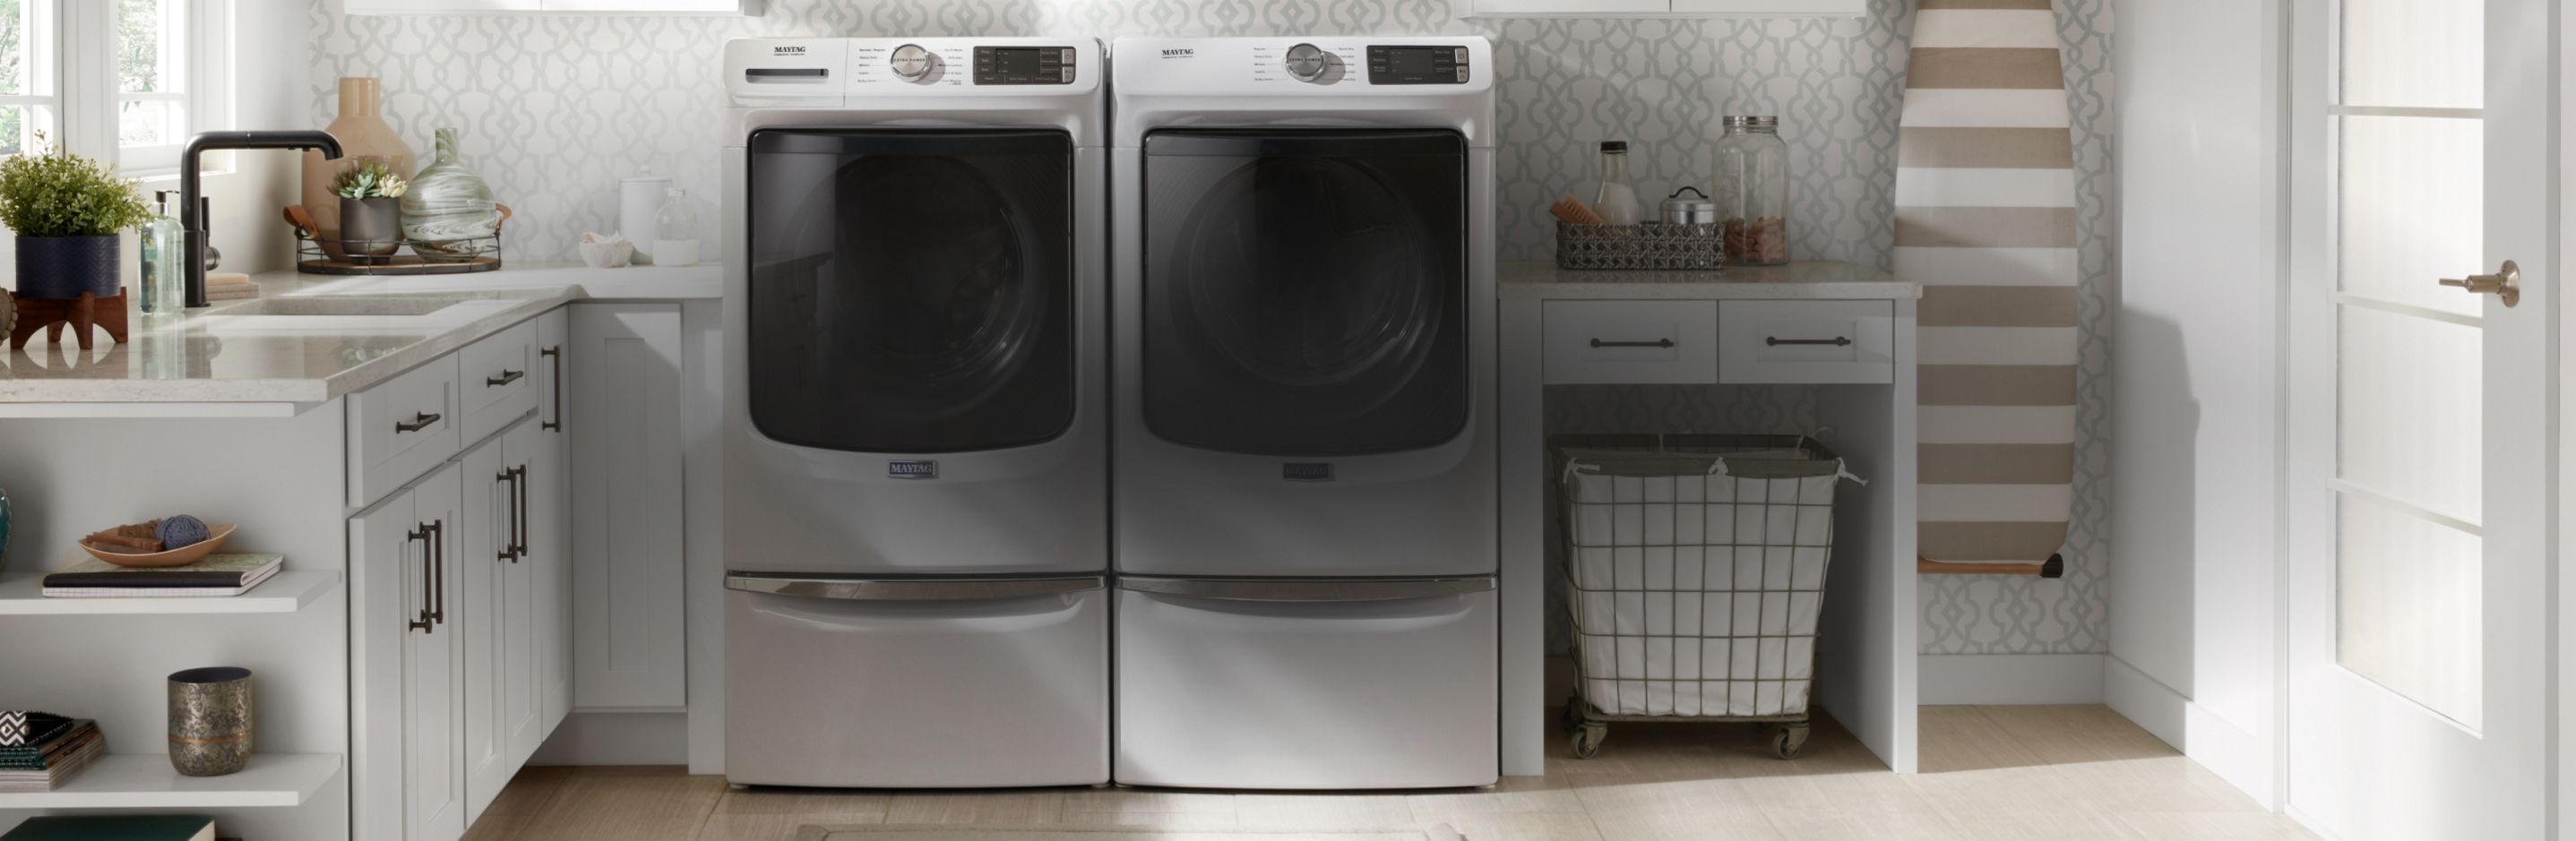 Shop limited-time offers on select Maytag® appliances.